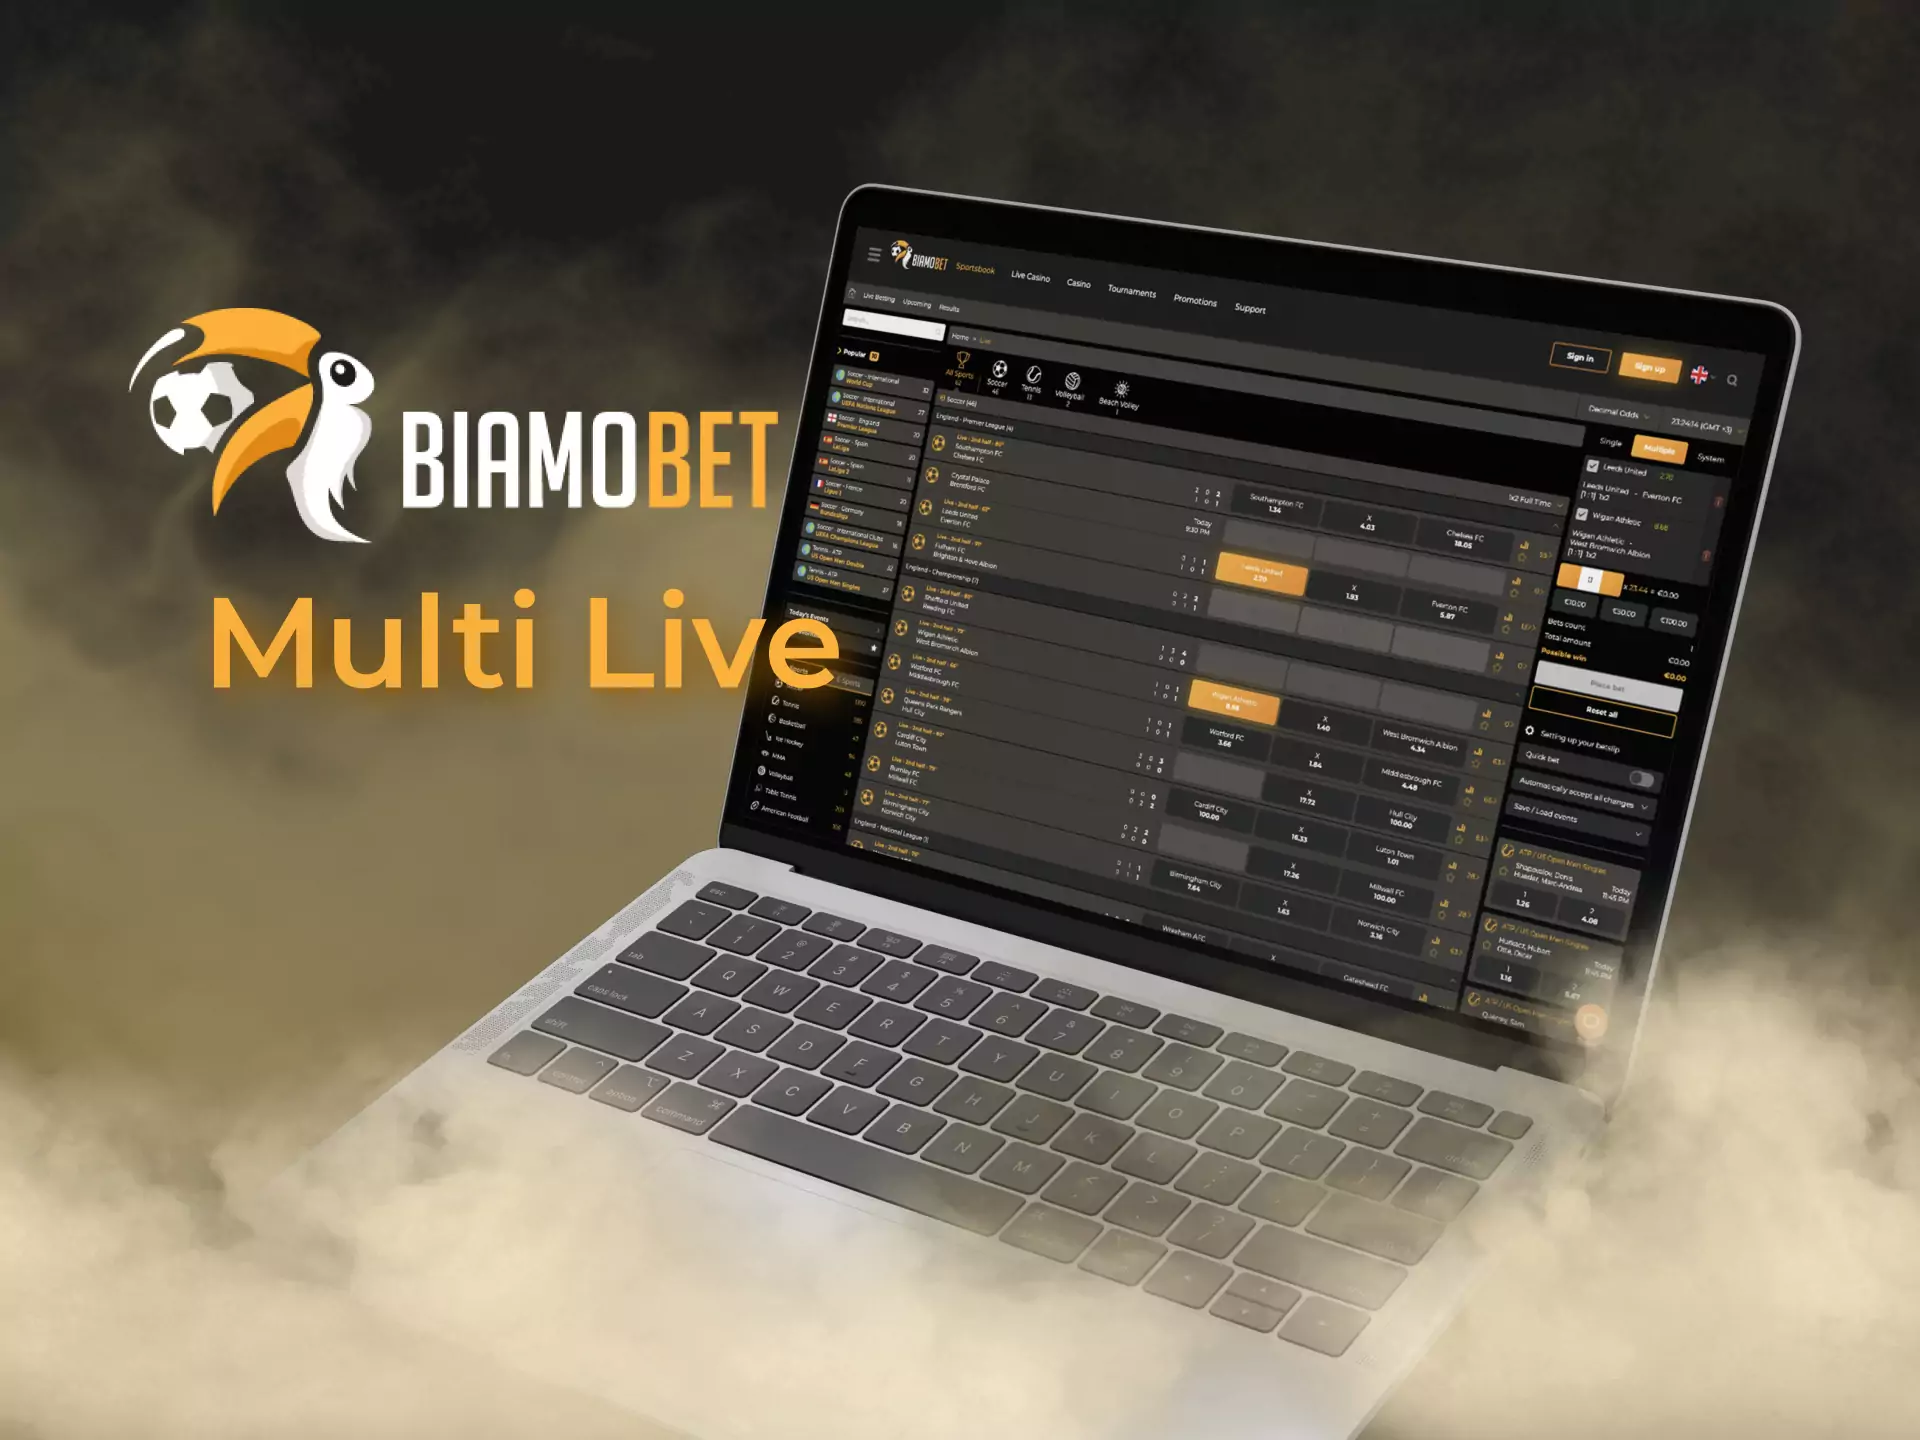 You can place multiple bets during live matches following them on Biamobet.